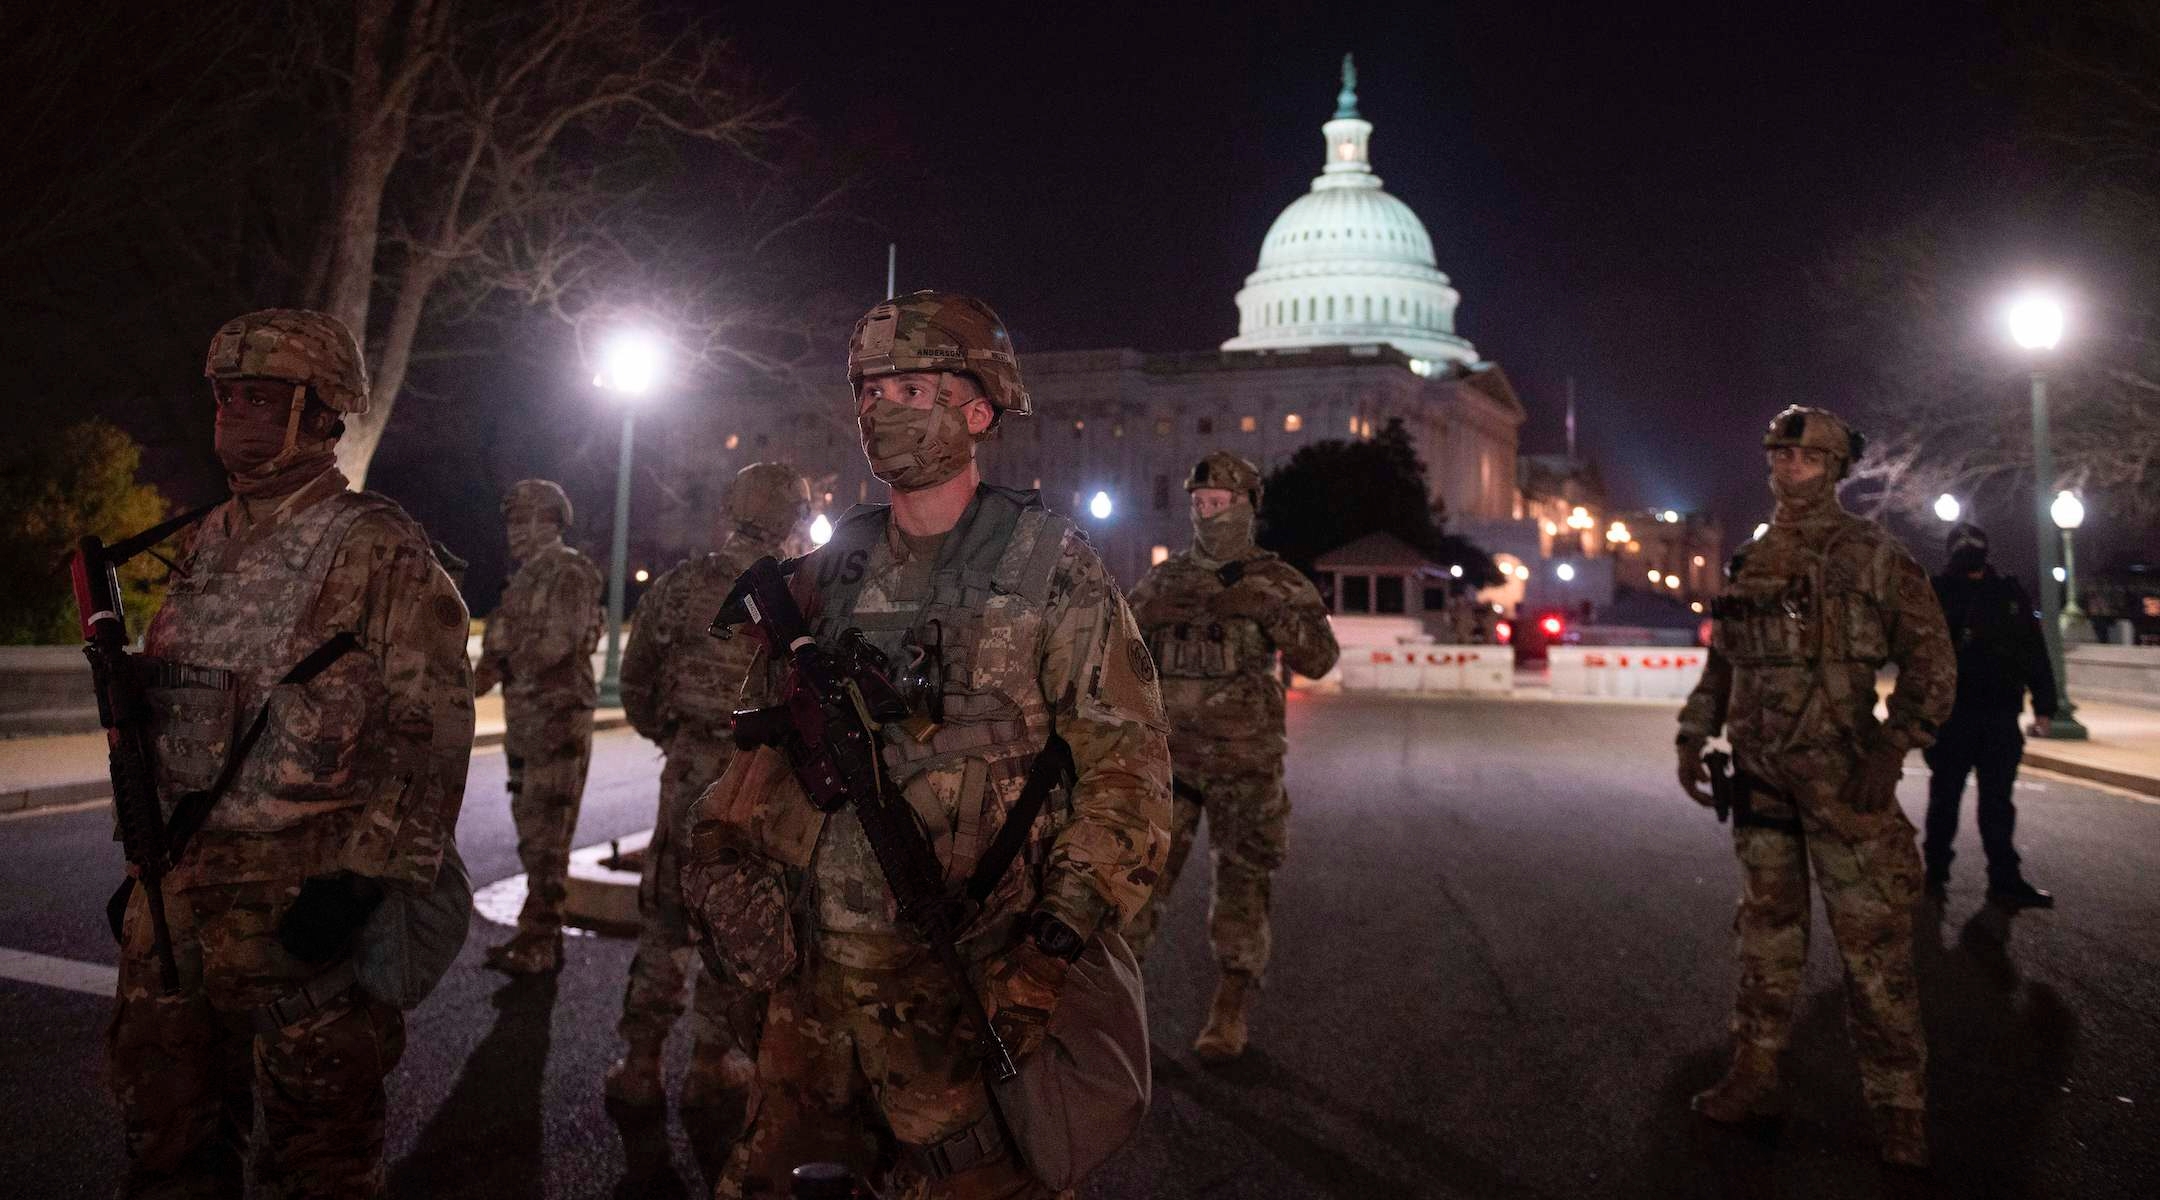 Members of the U.S. National Guard deploy around the U.S. Capitol on January 12, 2021 in Washington, DC. Fears of extremist protests across the United States remain a week after the storming of the Capitol and ahead of Joe Biden's inauguration. (Andrew Caballero-Reynolds/AFP via Getty Images)